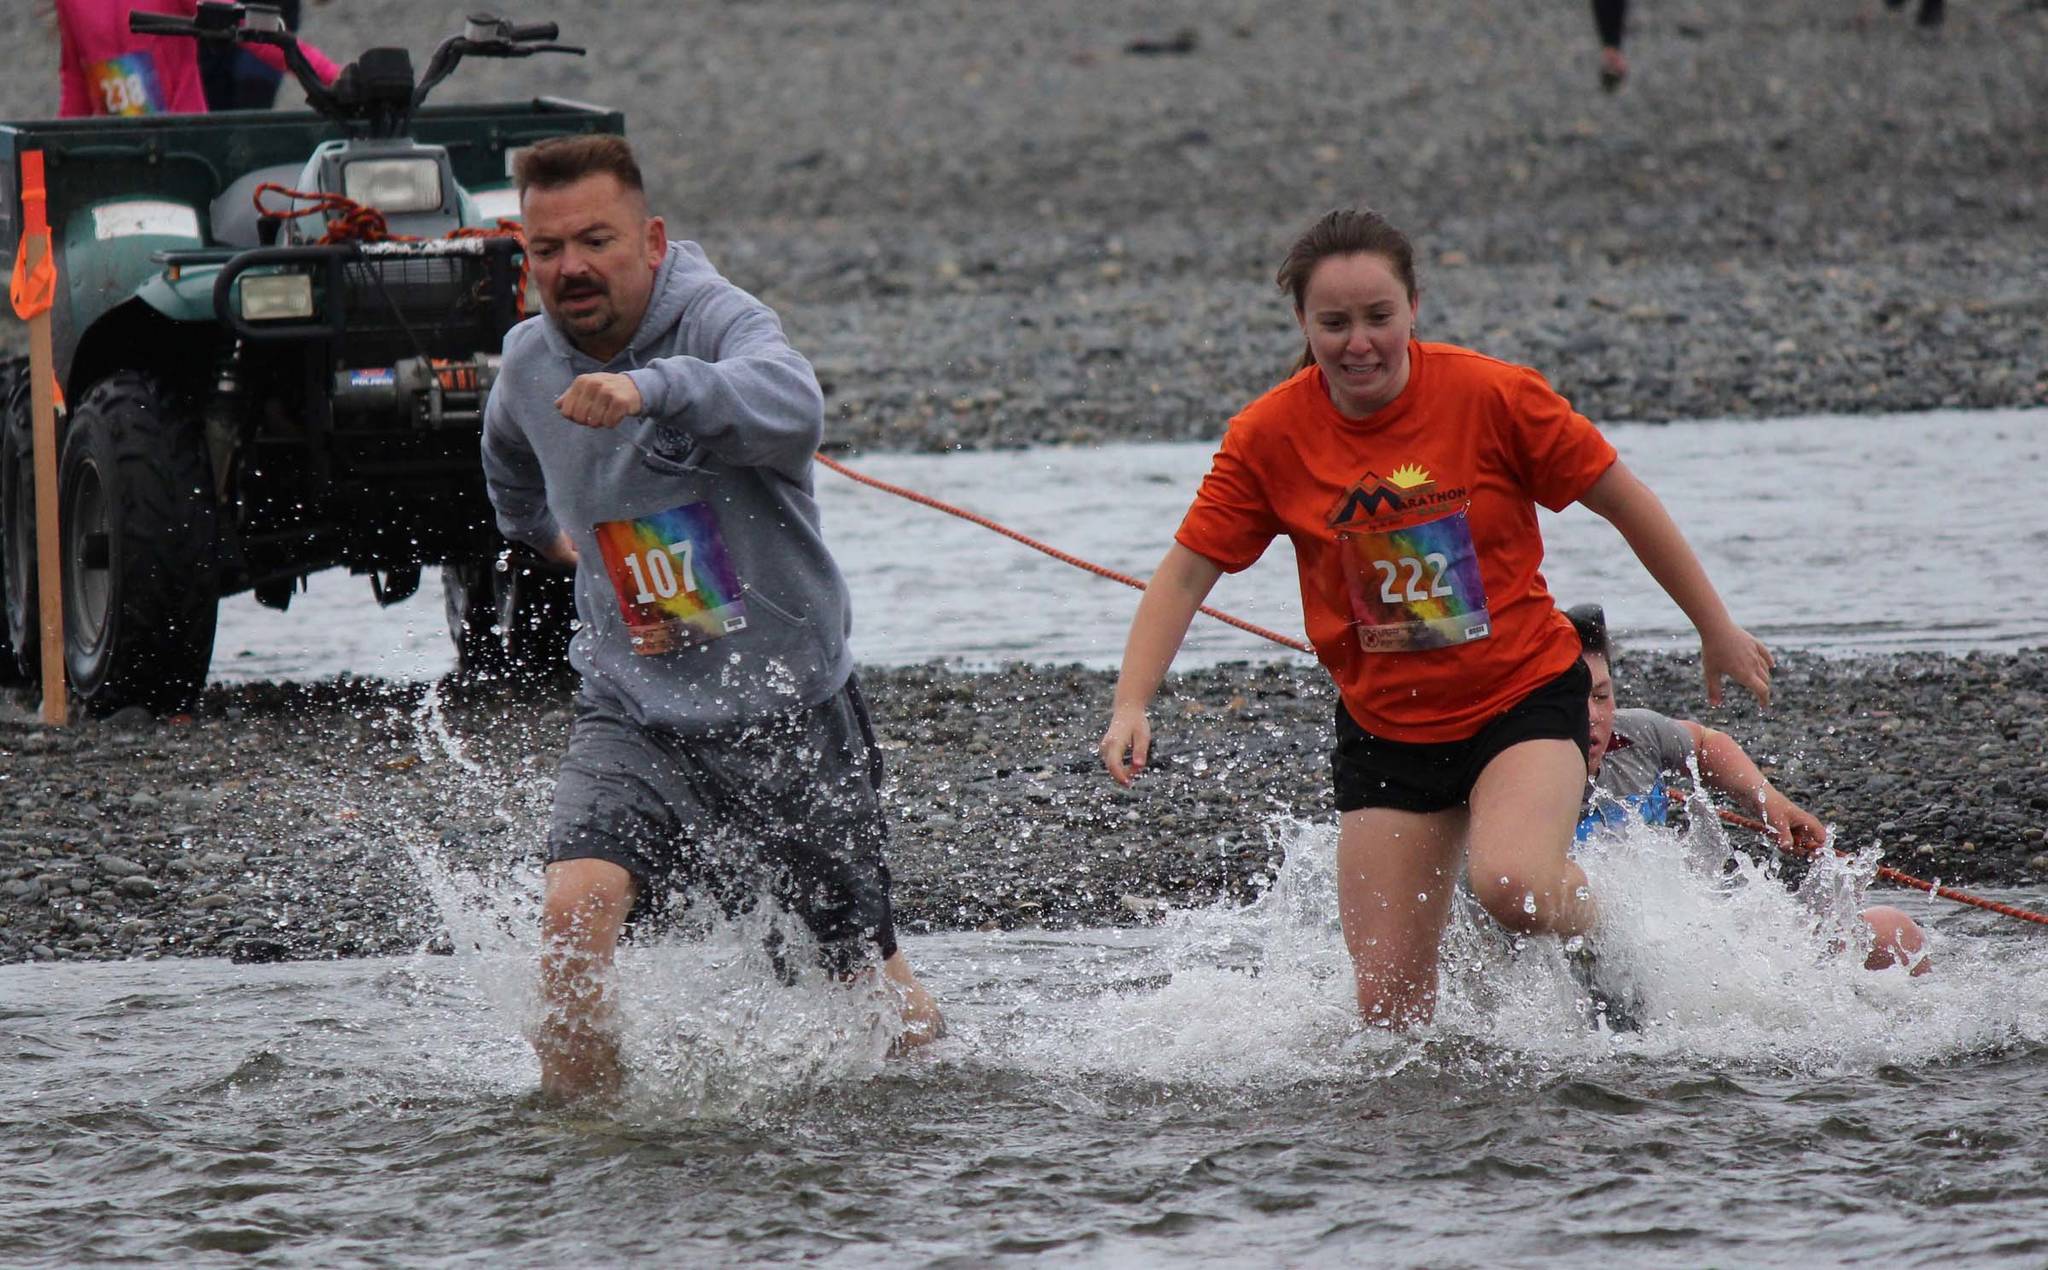 Jon Marsh, 107, and Mckenzie Lindeman, 222, don’t let a little cold water slow them down in the Clam Scramble held Saturday June 15, 2019 on Ninilchik beach, Alaska. (Photo by McKibben Jackinsky)